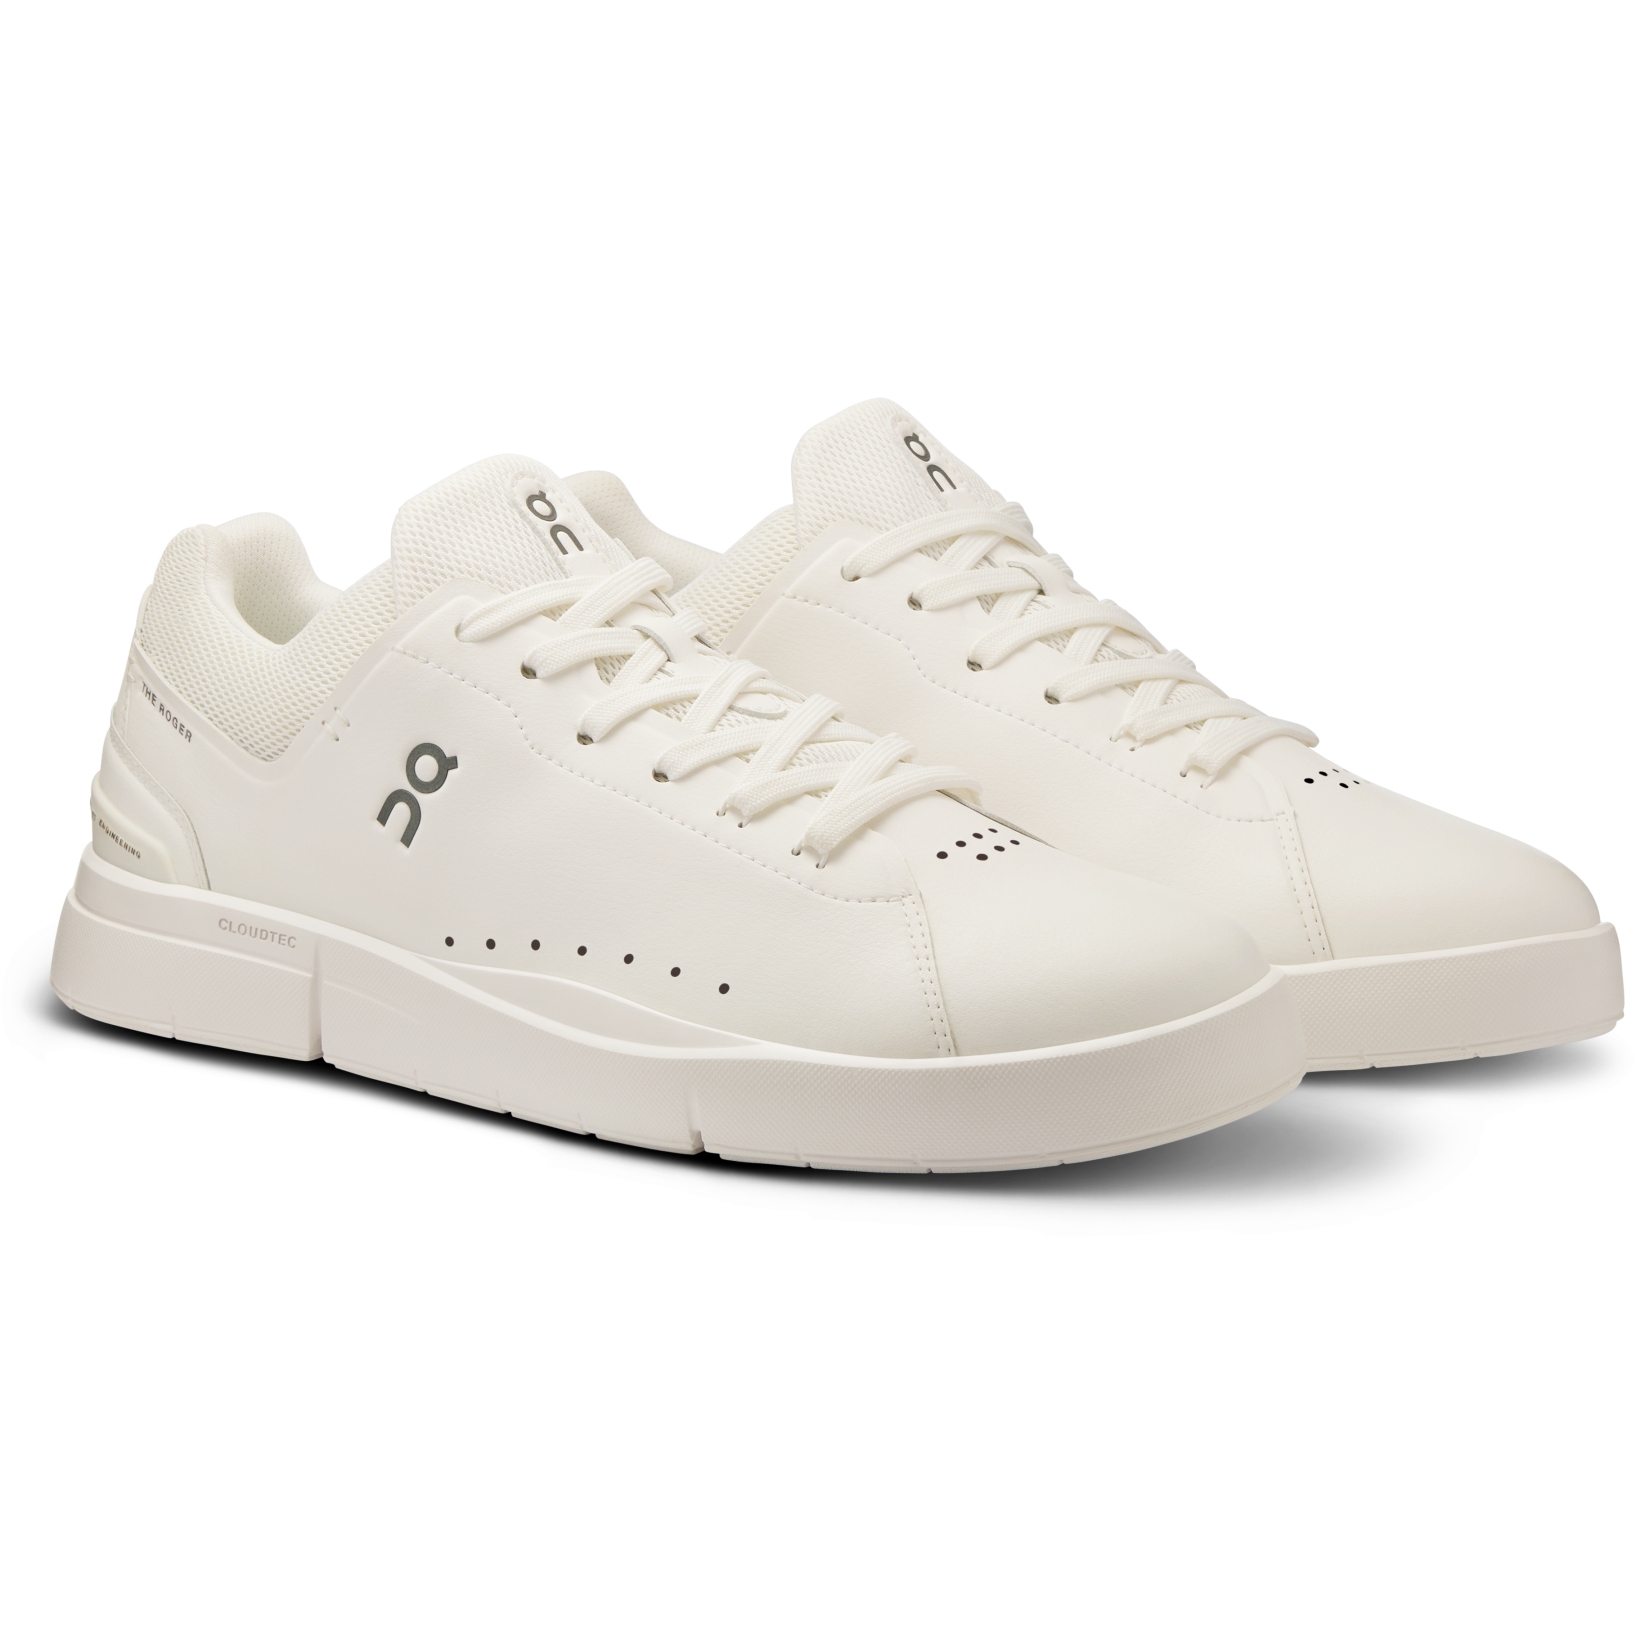 Productfoto van On The Roger Advantage Sneaker - White | Undyed